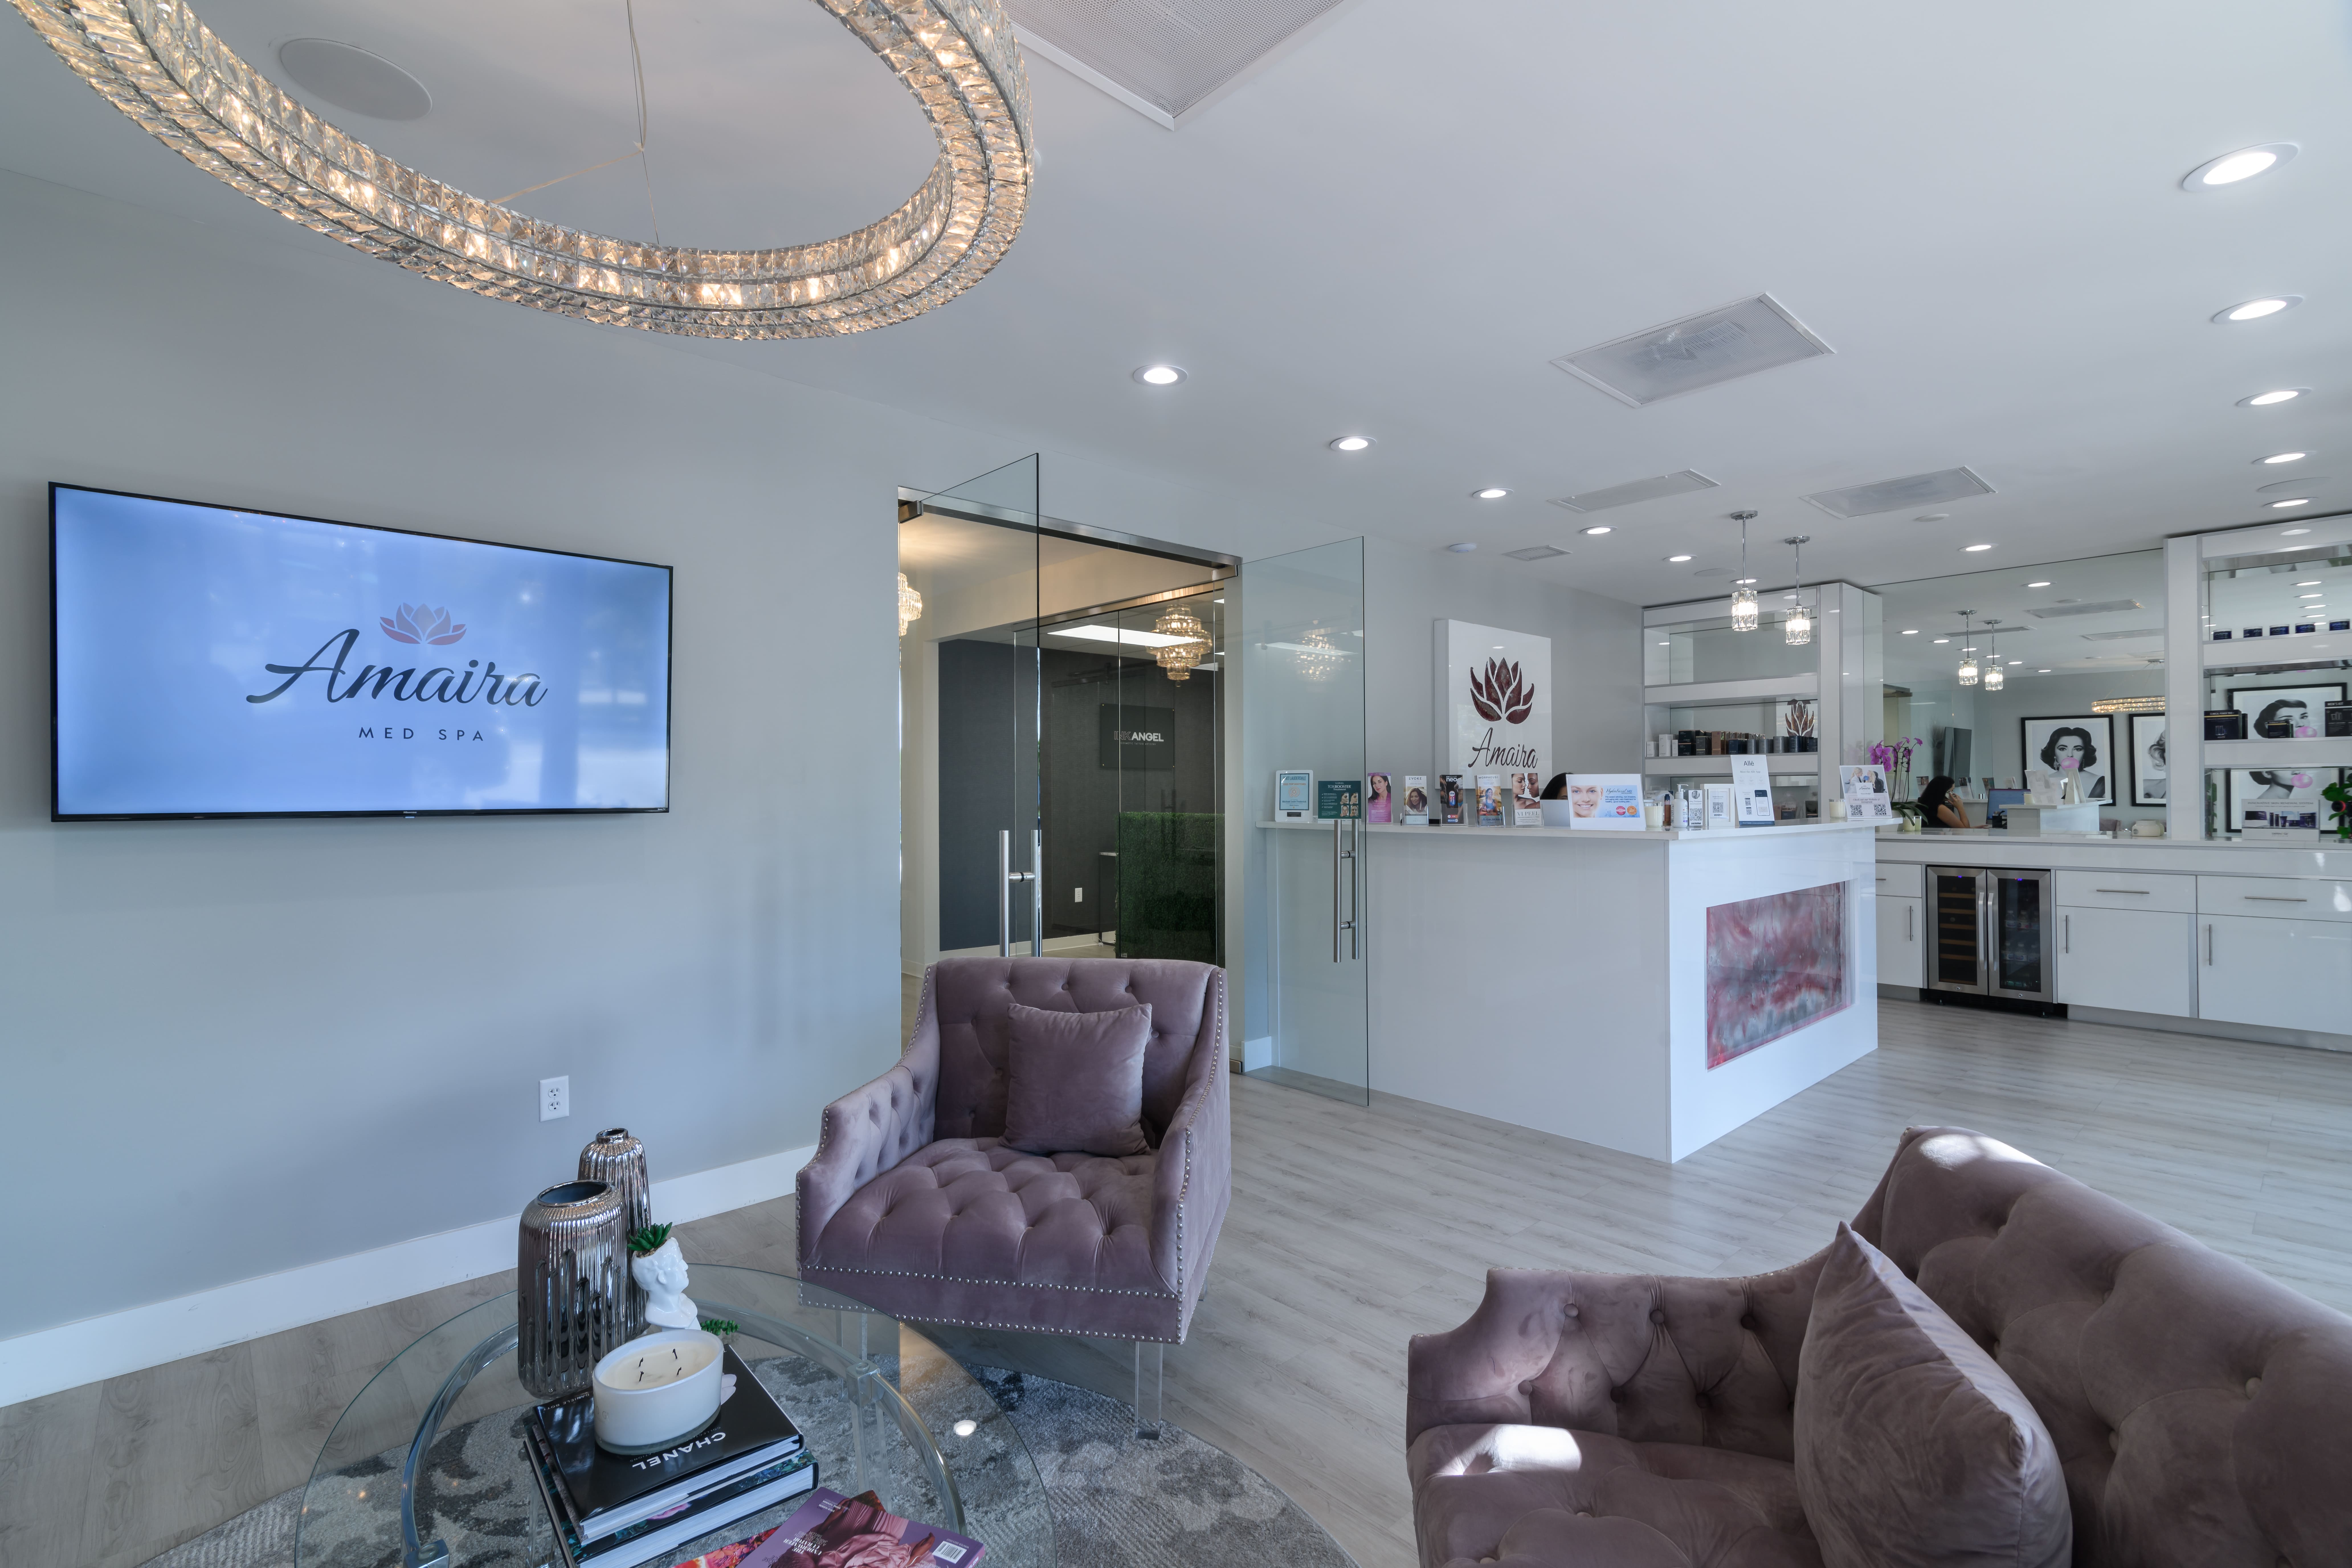 Amaira med spa- the best med spa for Fort lauderdale- West palm beach- Hydrafacial- Dermaplaning- Derma fillers- sculptra- Juvederm-botox- Skin pen- morpheus8-Chemical peels-Hydrafacials treatment-Best spa fort lauderdale-dermal fillers las olas emsculpt neo treatment near me -morpheus8 treatment near me - Fort lauderdale facial- botox treatment fort lauderdale